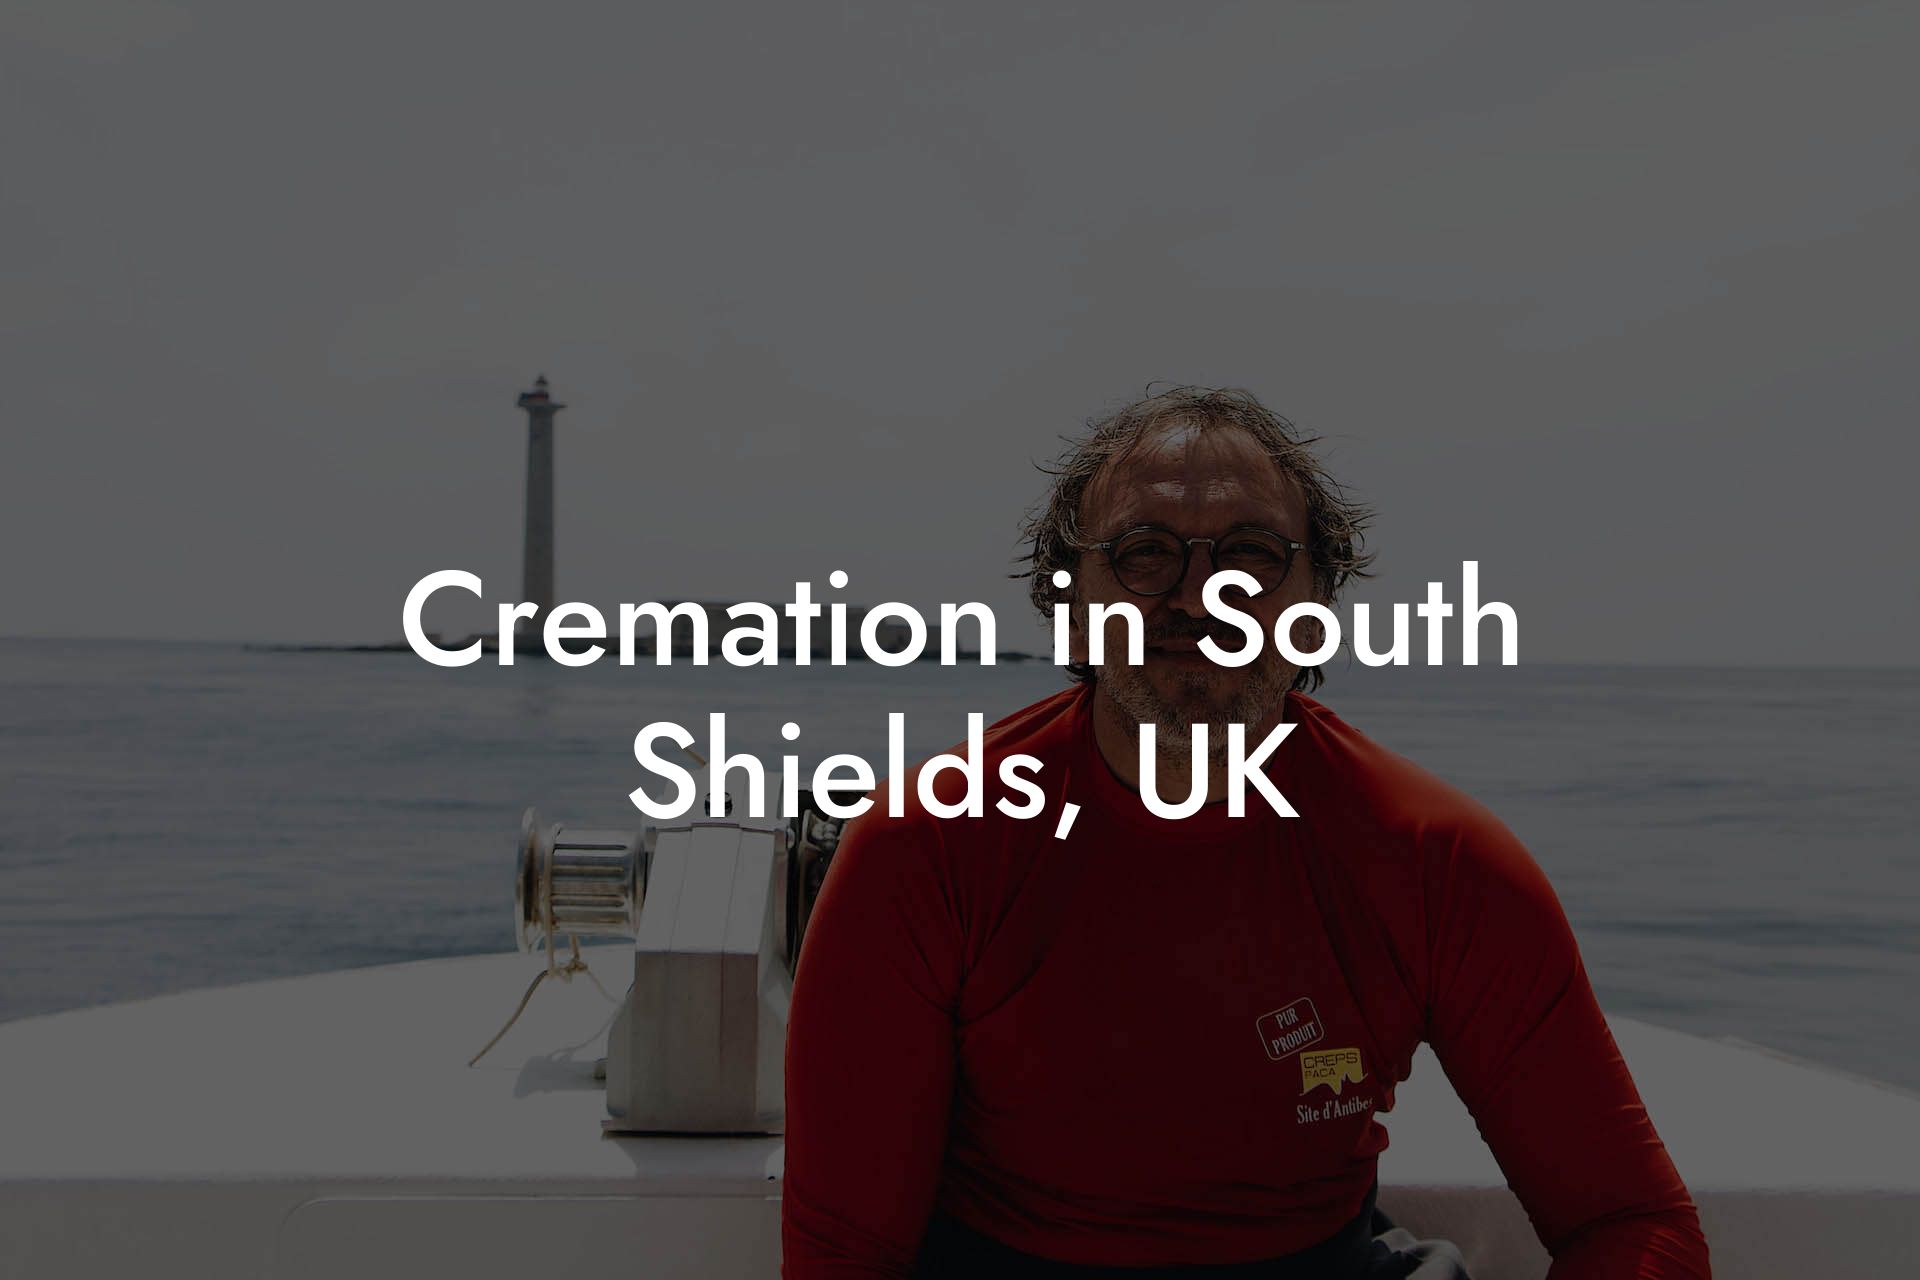 Cremation in South Shields, UK